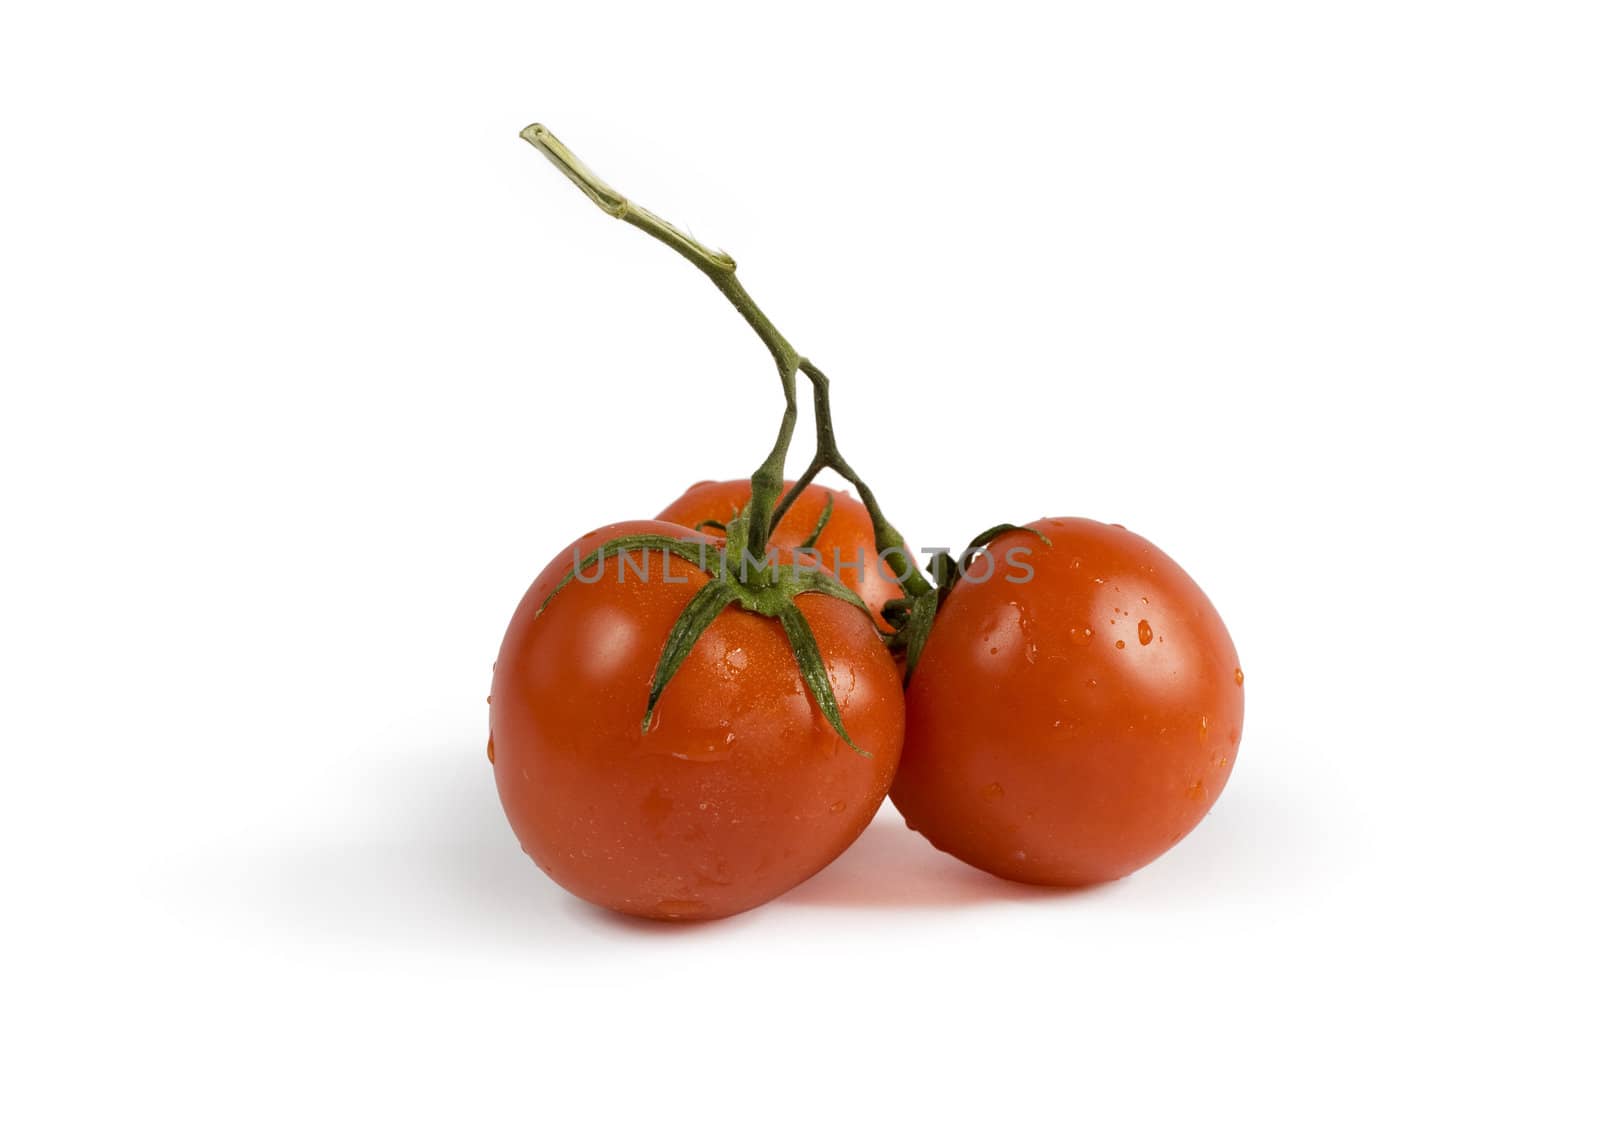 Three red tomatoes with shadow isolated on white background. Clipping path included to remove object shadow or replace background.